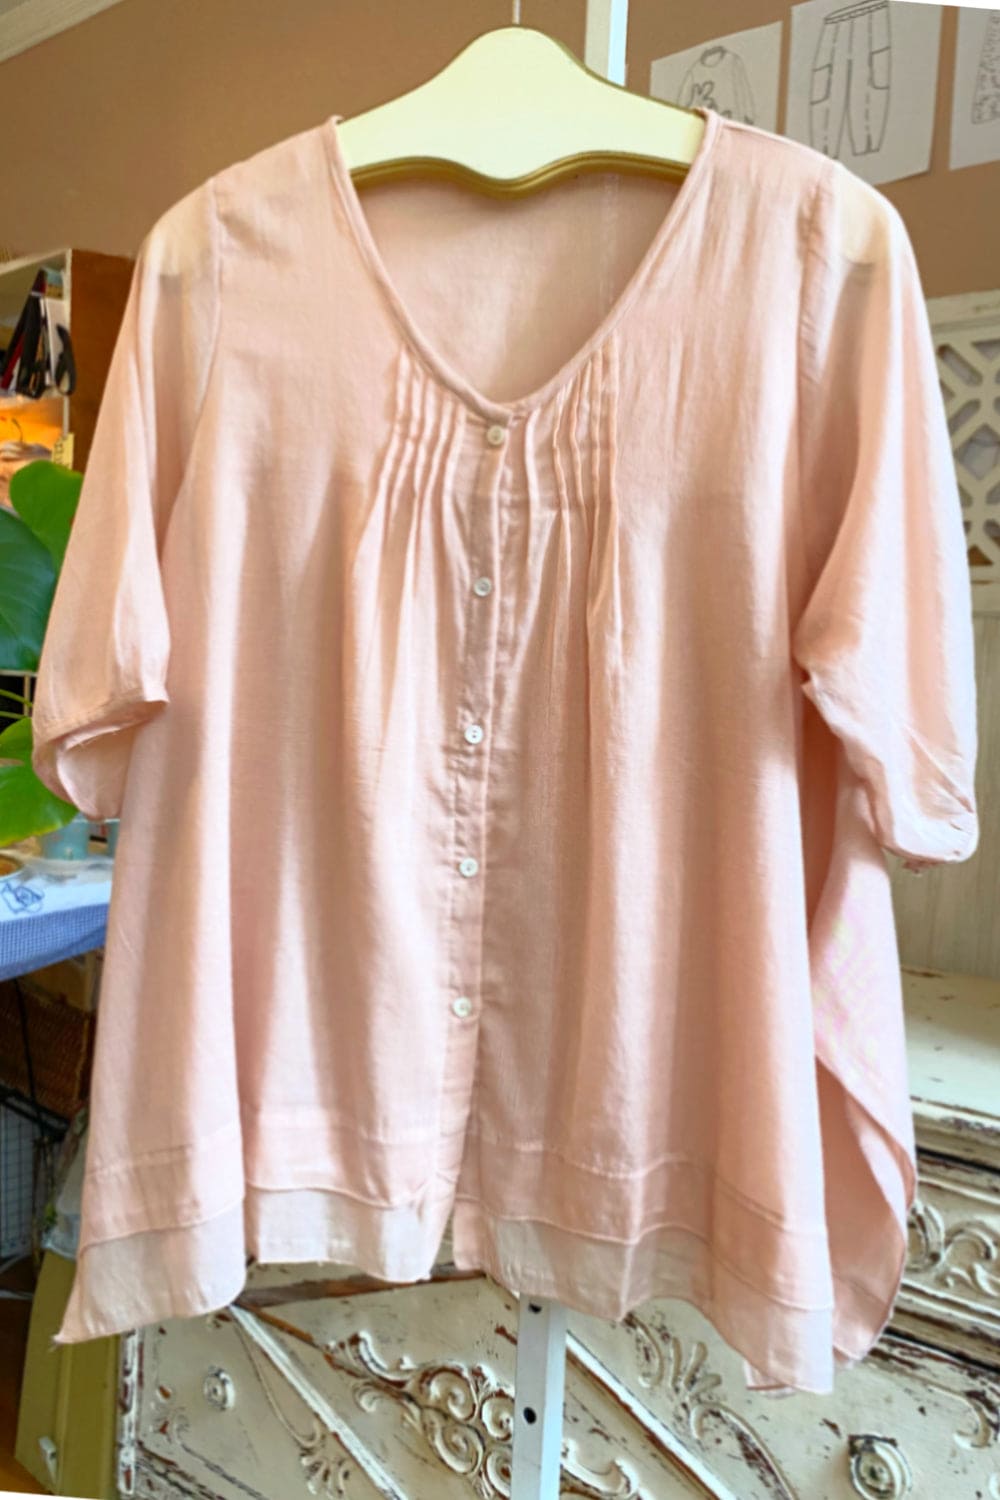 Lightweight cotton aline blouse with pearl buttons in a pretty blush color.